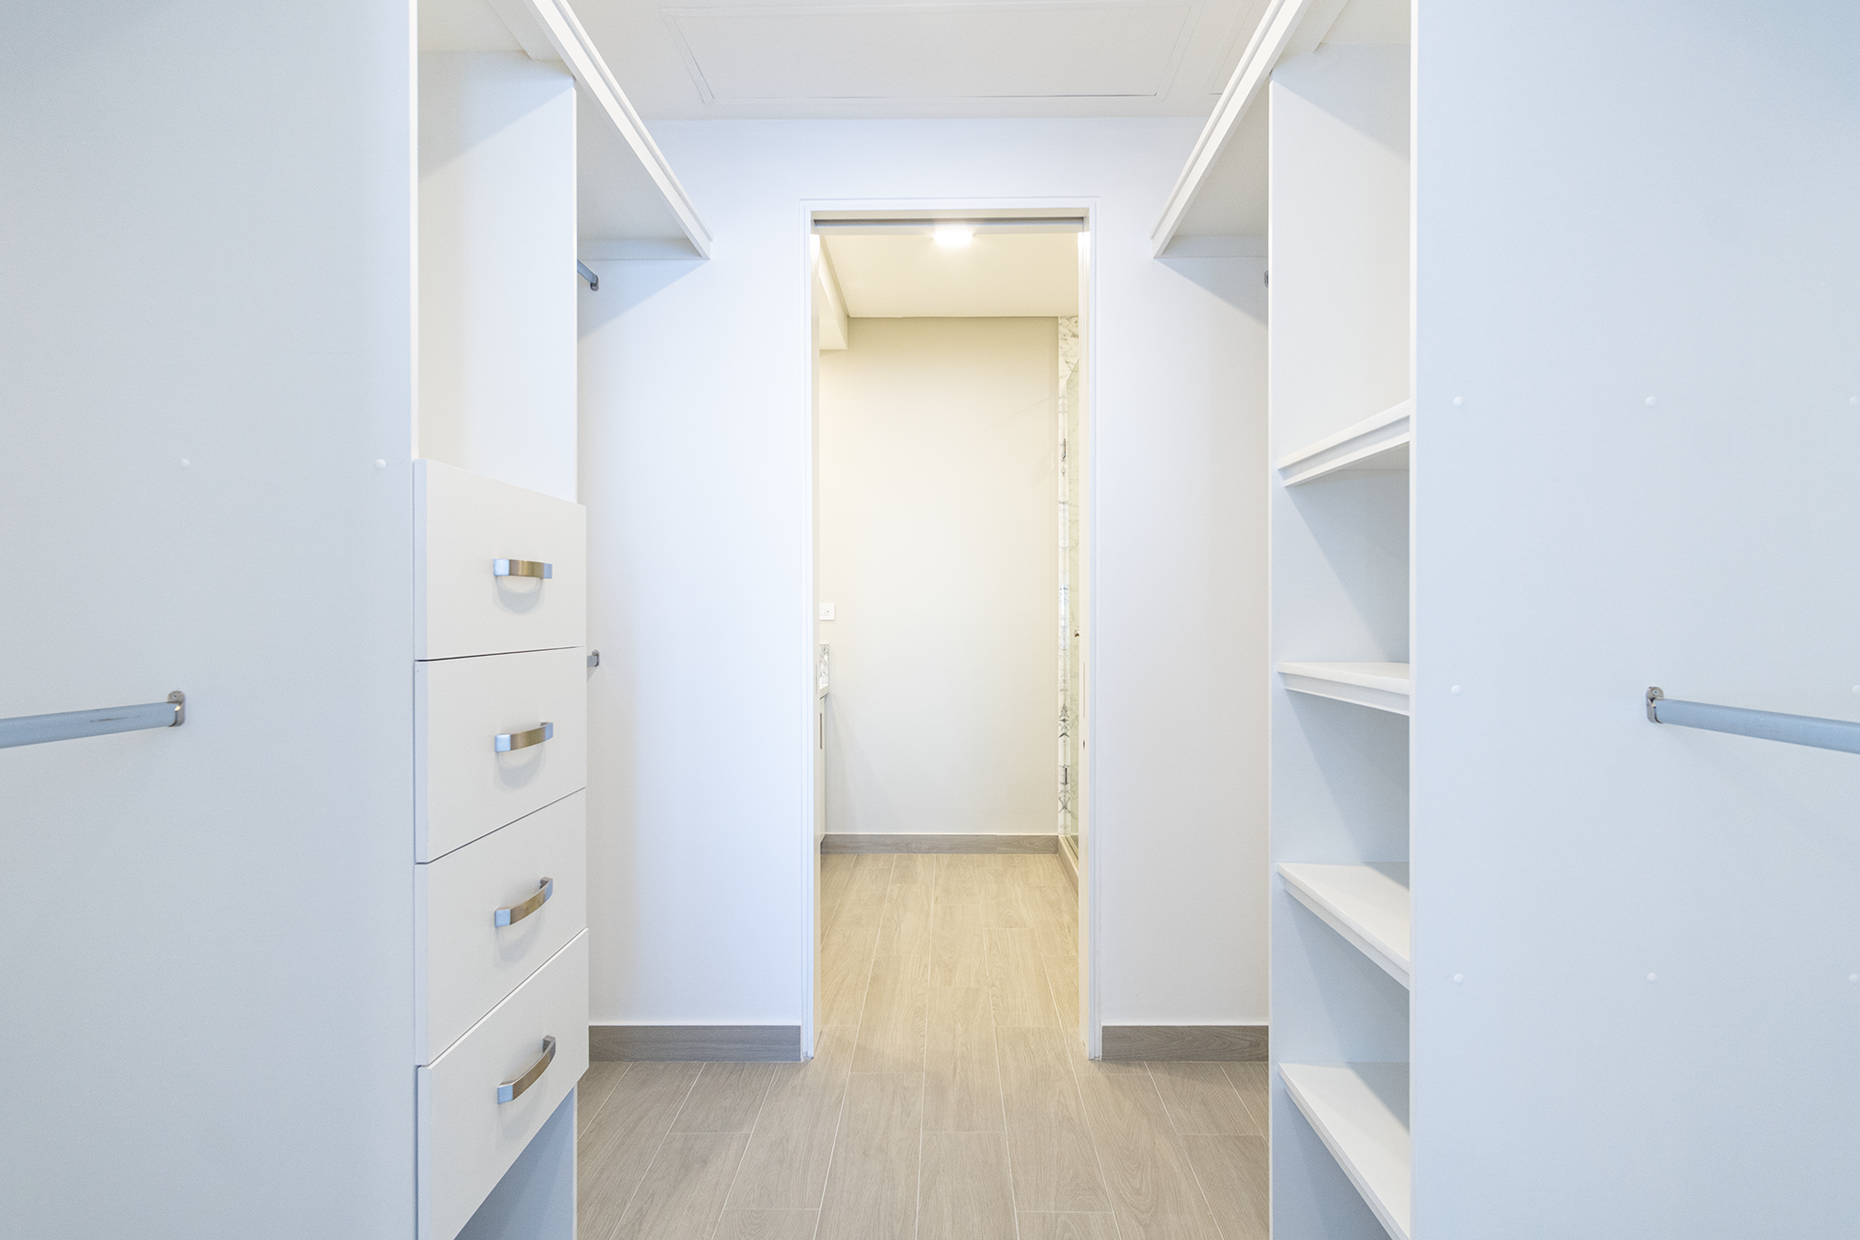 The large walk-through closet of the main bedroom.